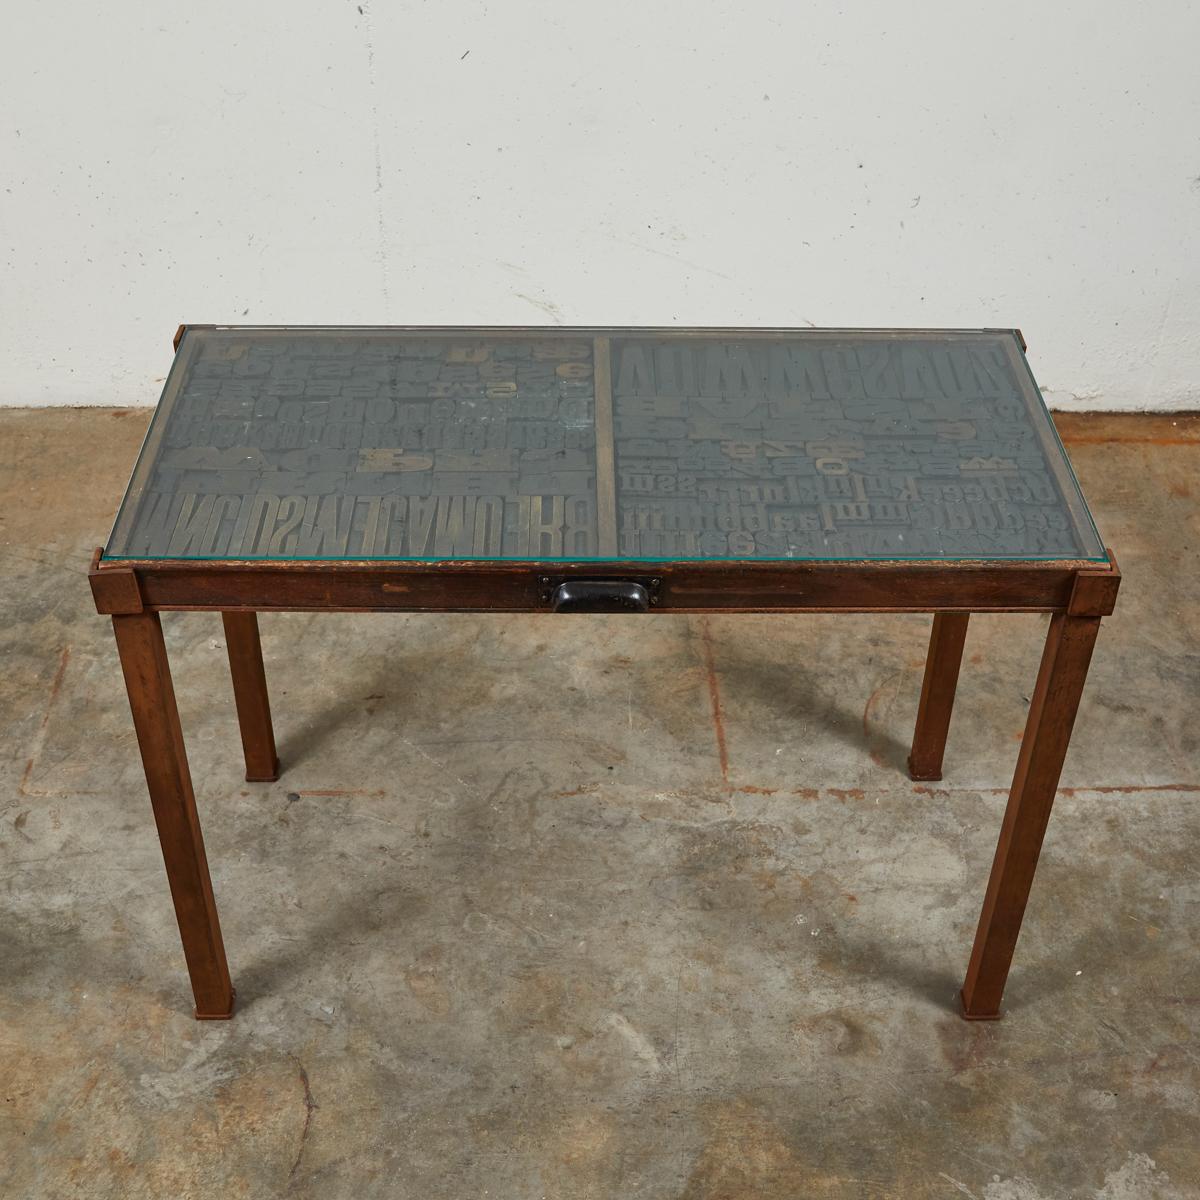 Industrial glass top table with graphic lettered top. The table began its life as a typeface tray in late 19th-century France. Having since been mounted on rectangular iron legs and given a glass top, the table's design reflects its industrial